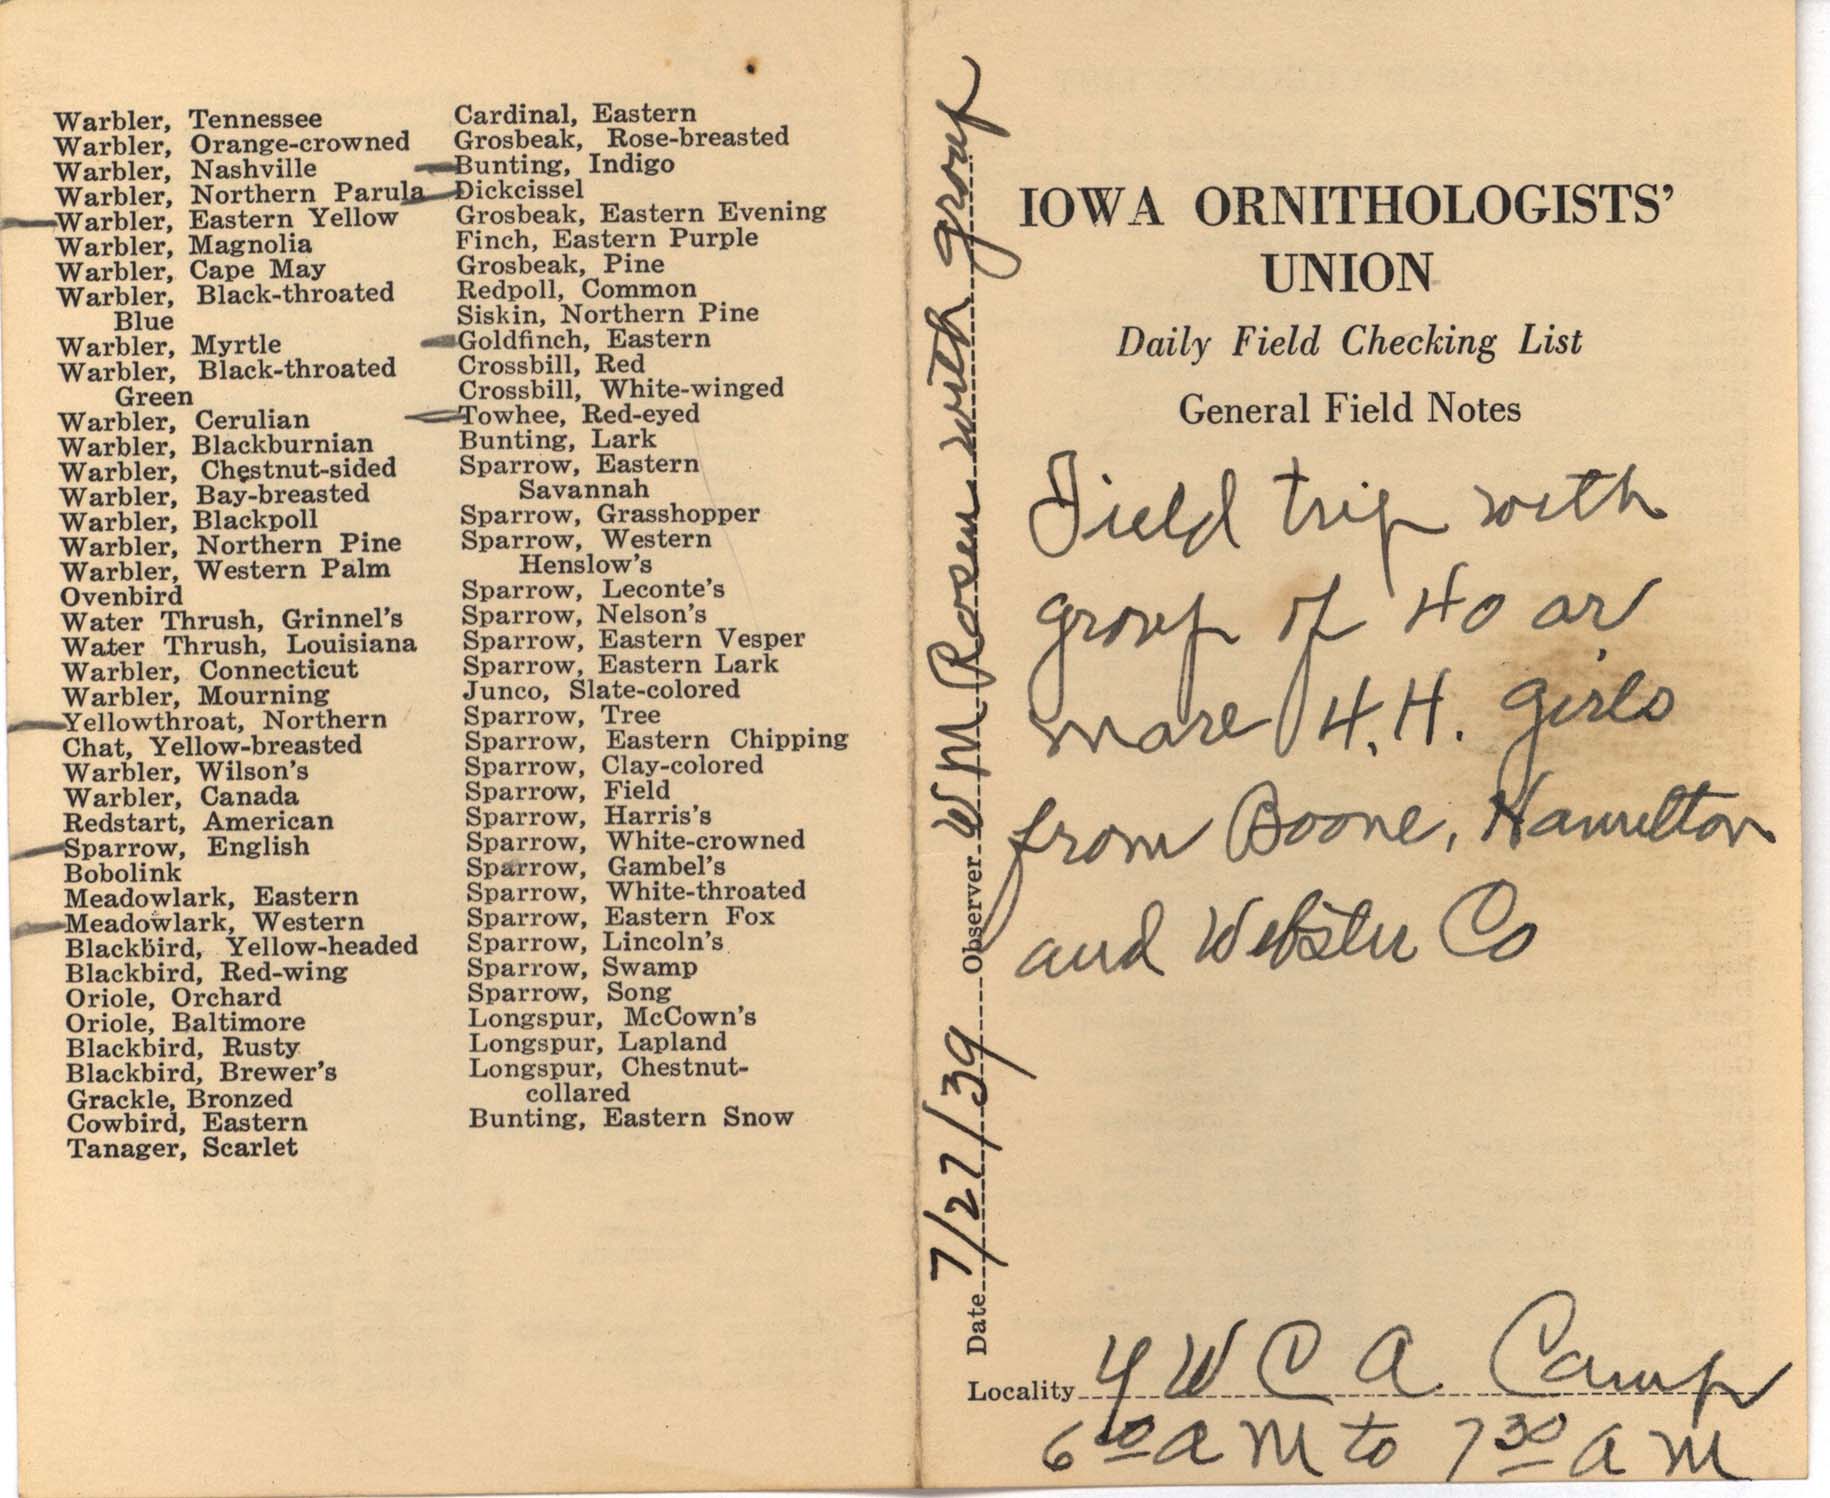 Daily field checking list by Walter Rosene, July 27, 1939